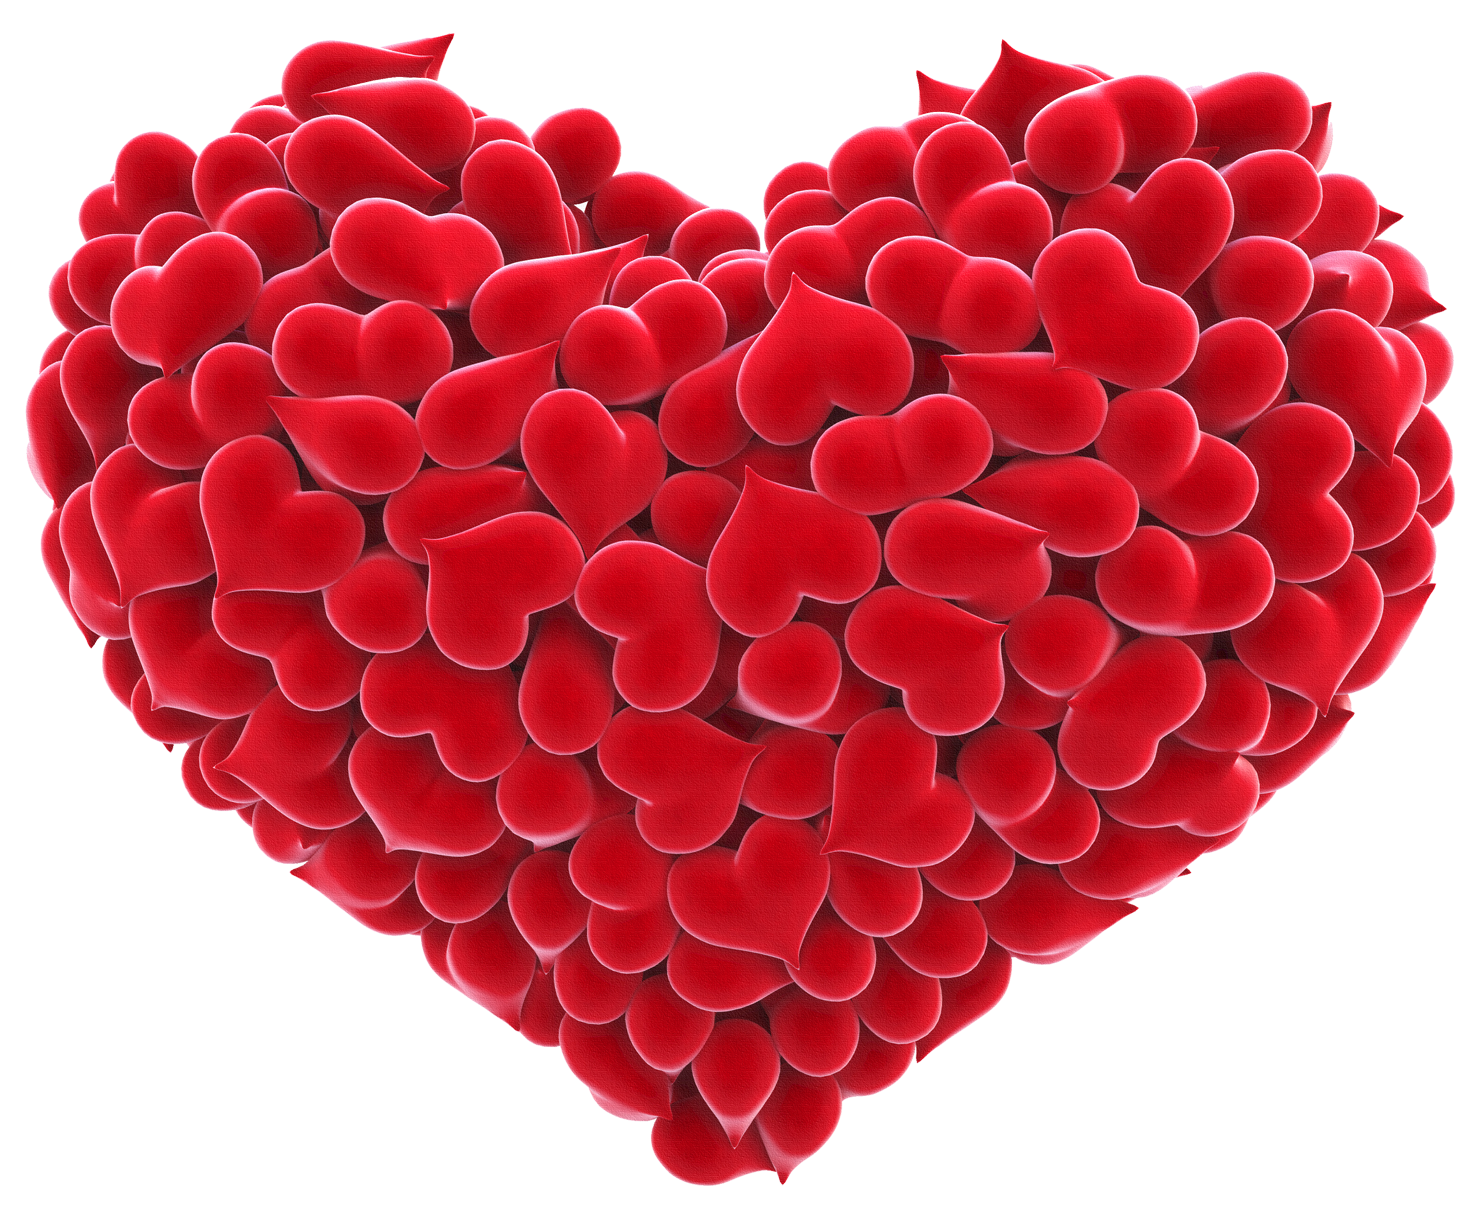 Red Heart PNG Image.